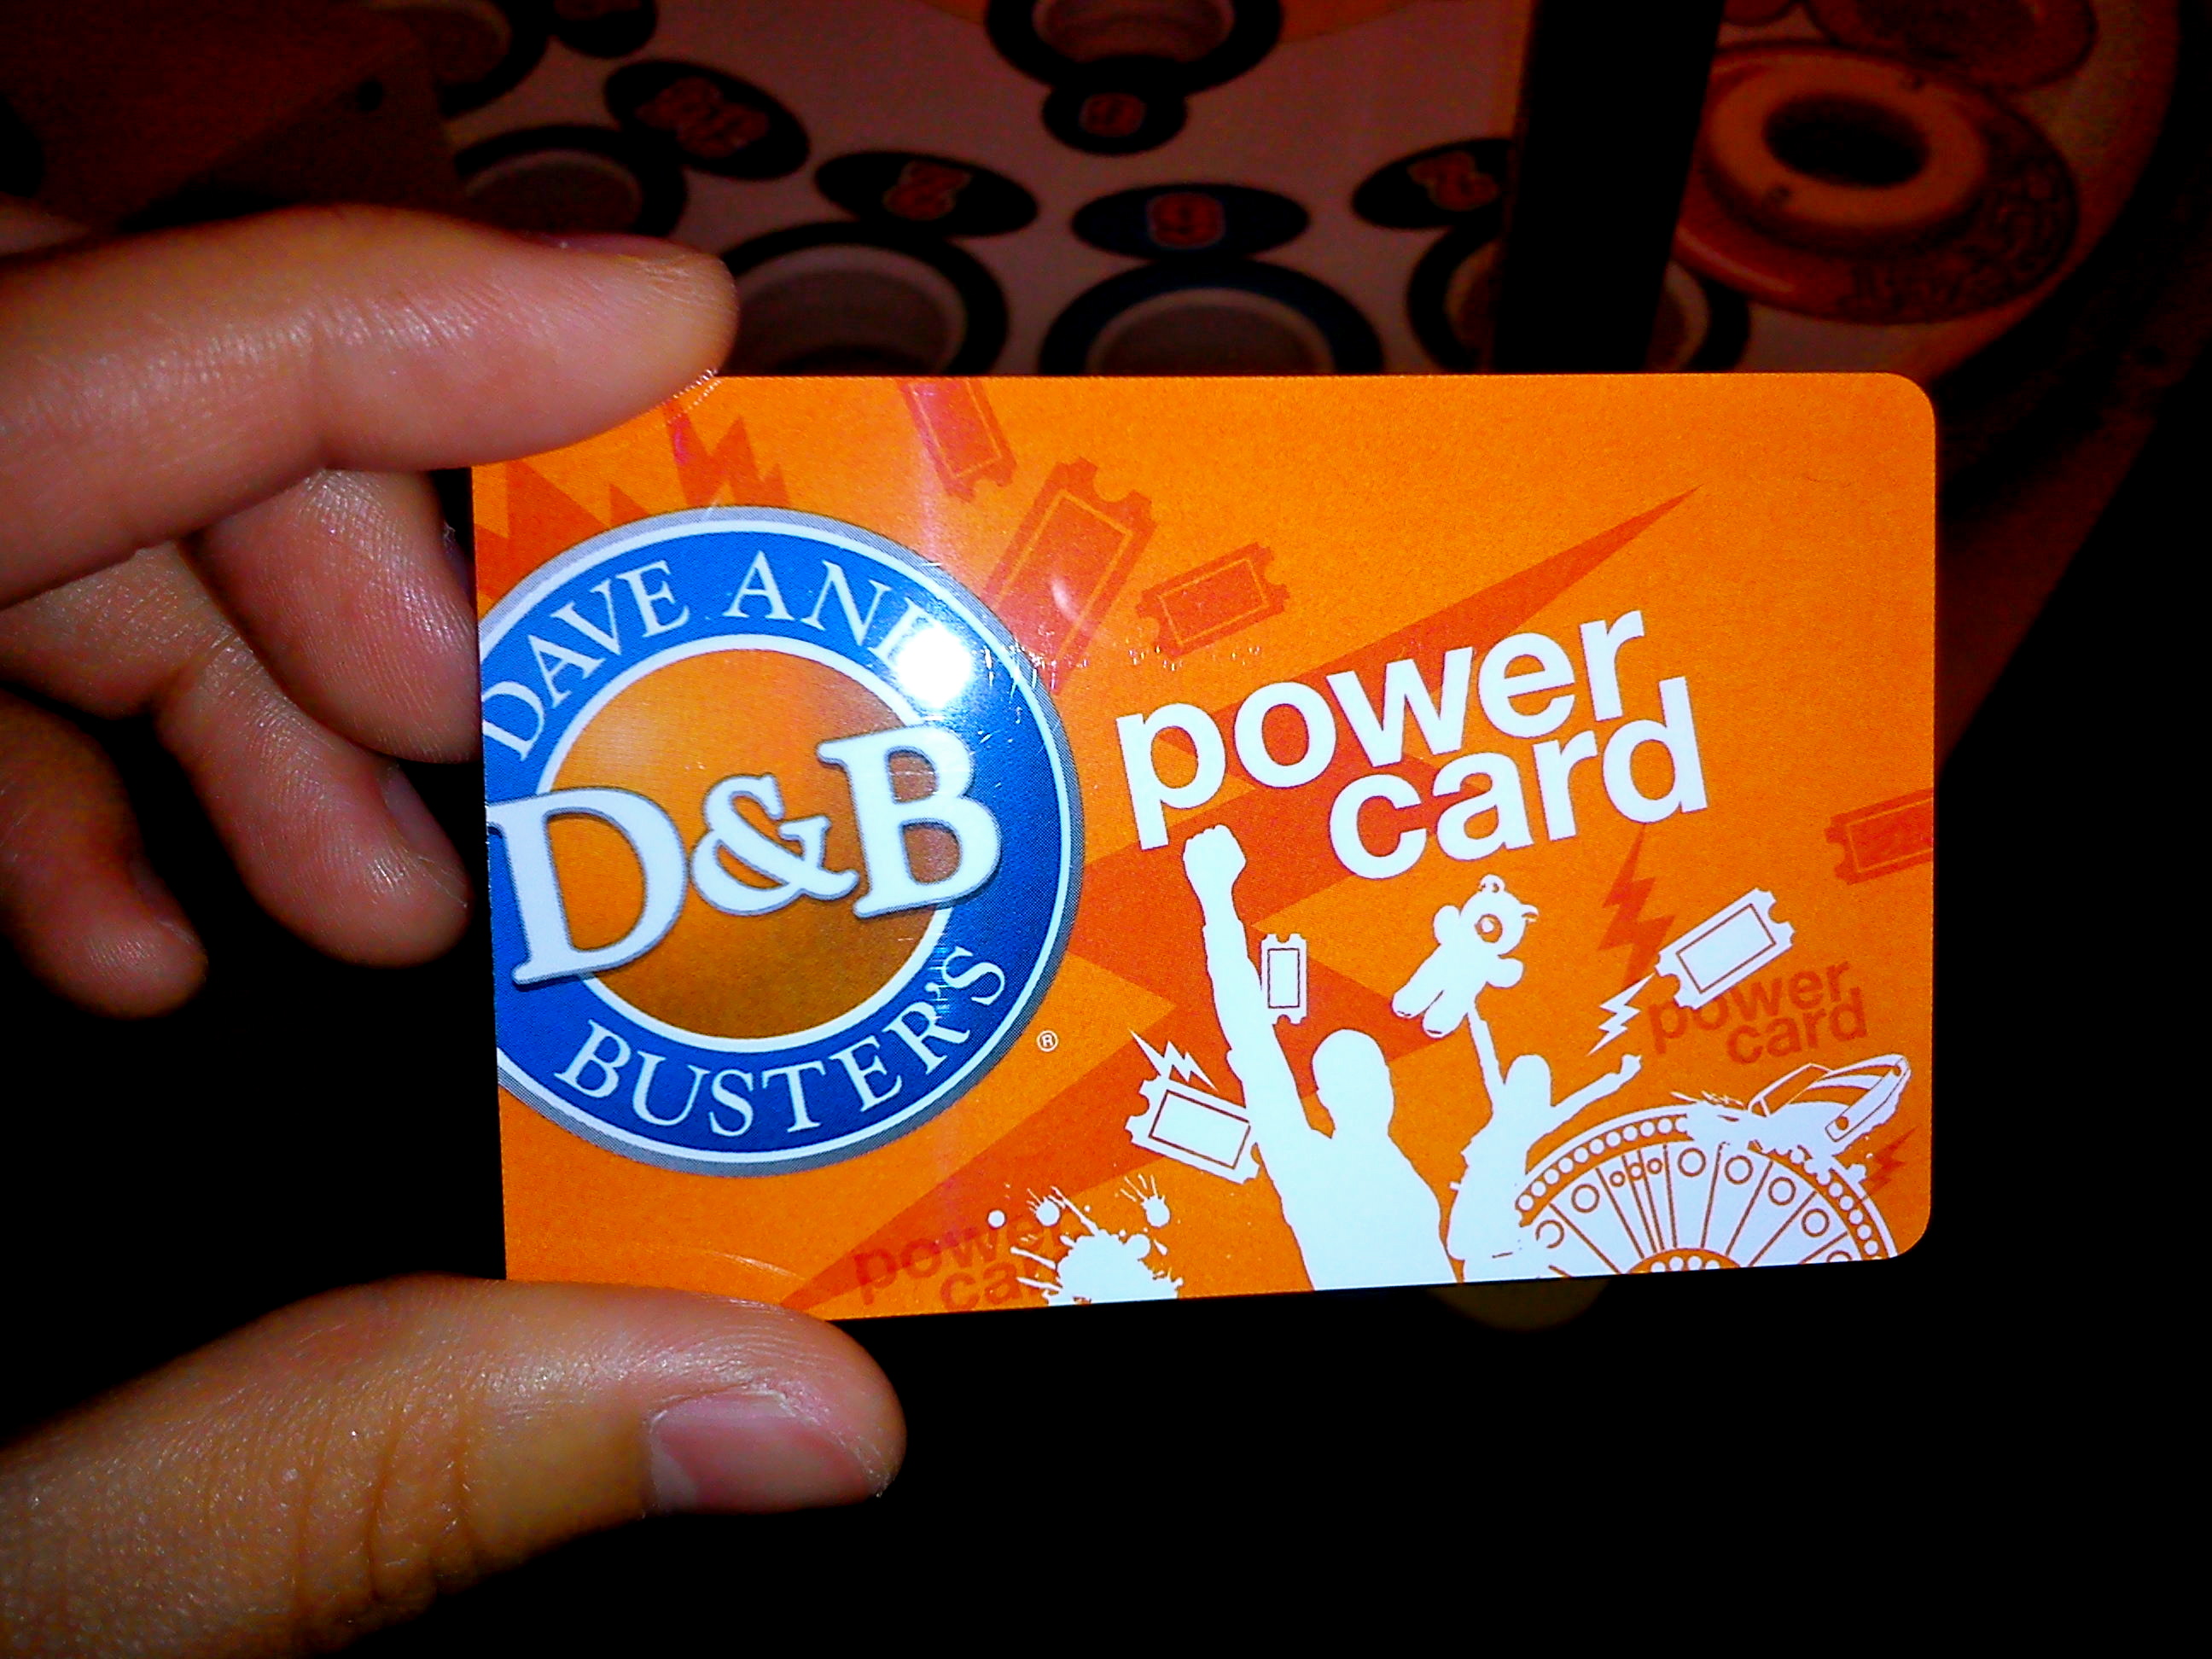 super power card dave and busters